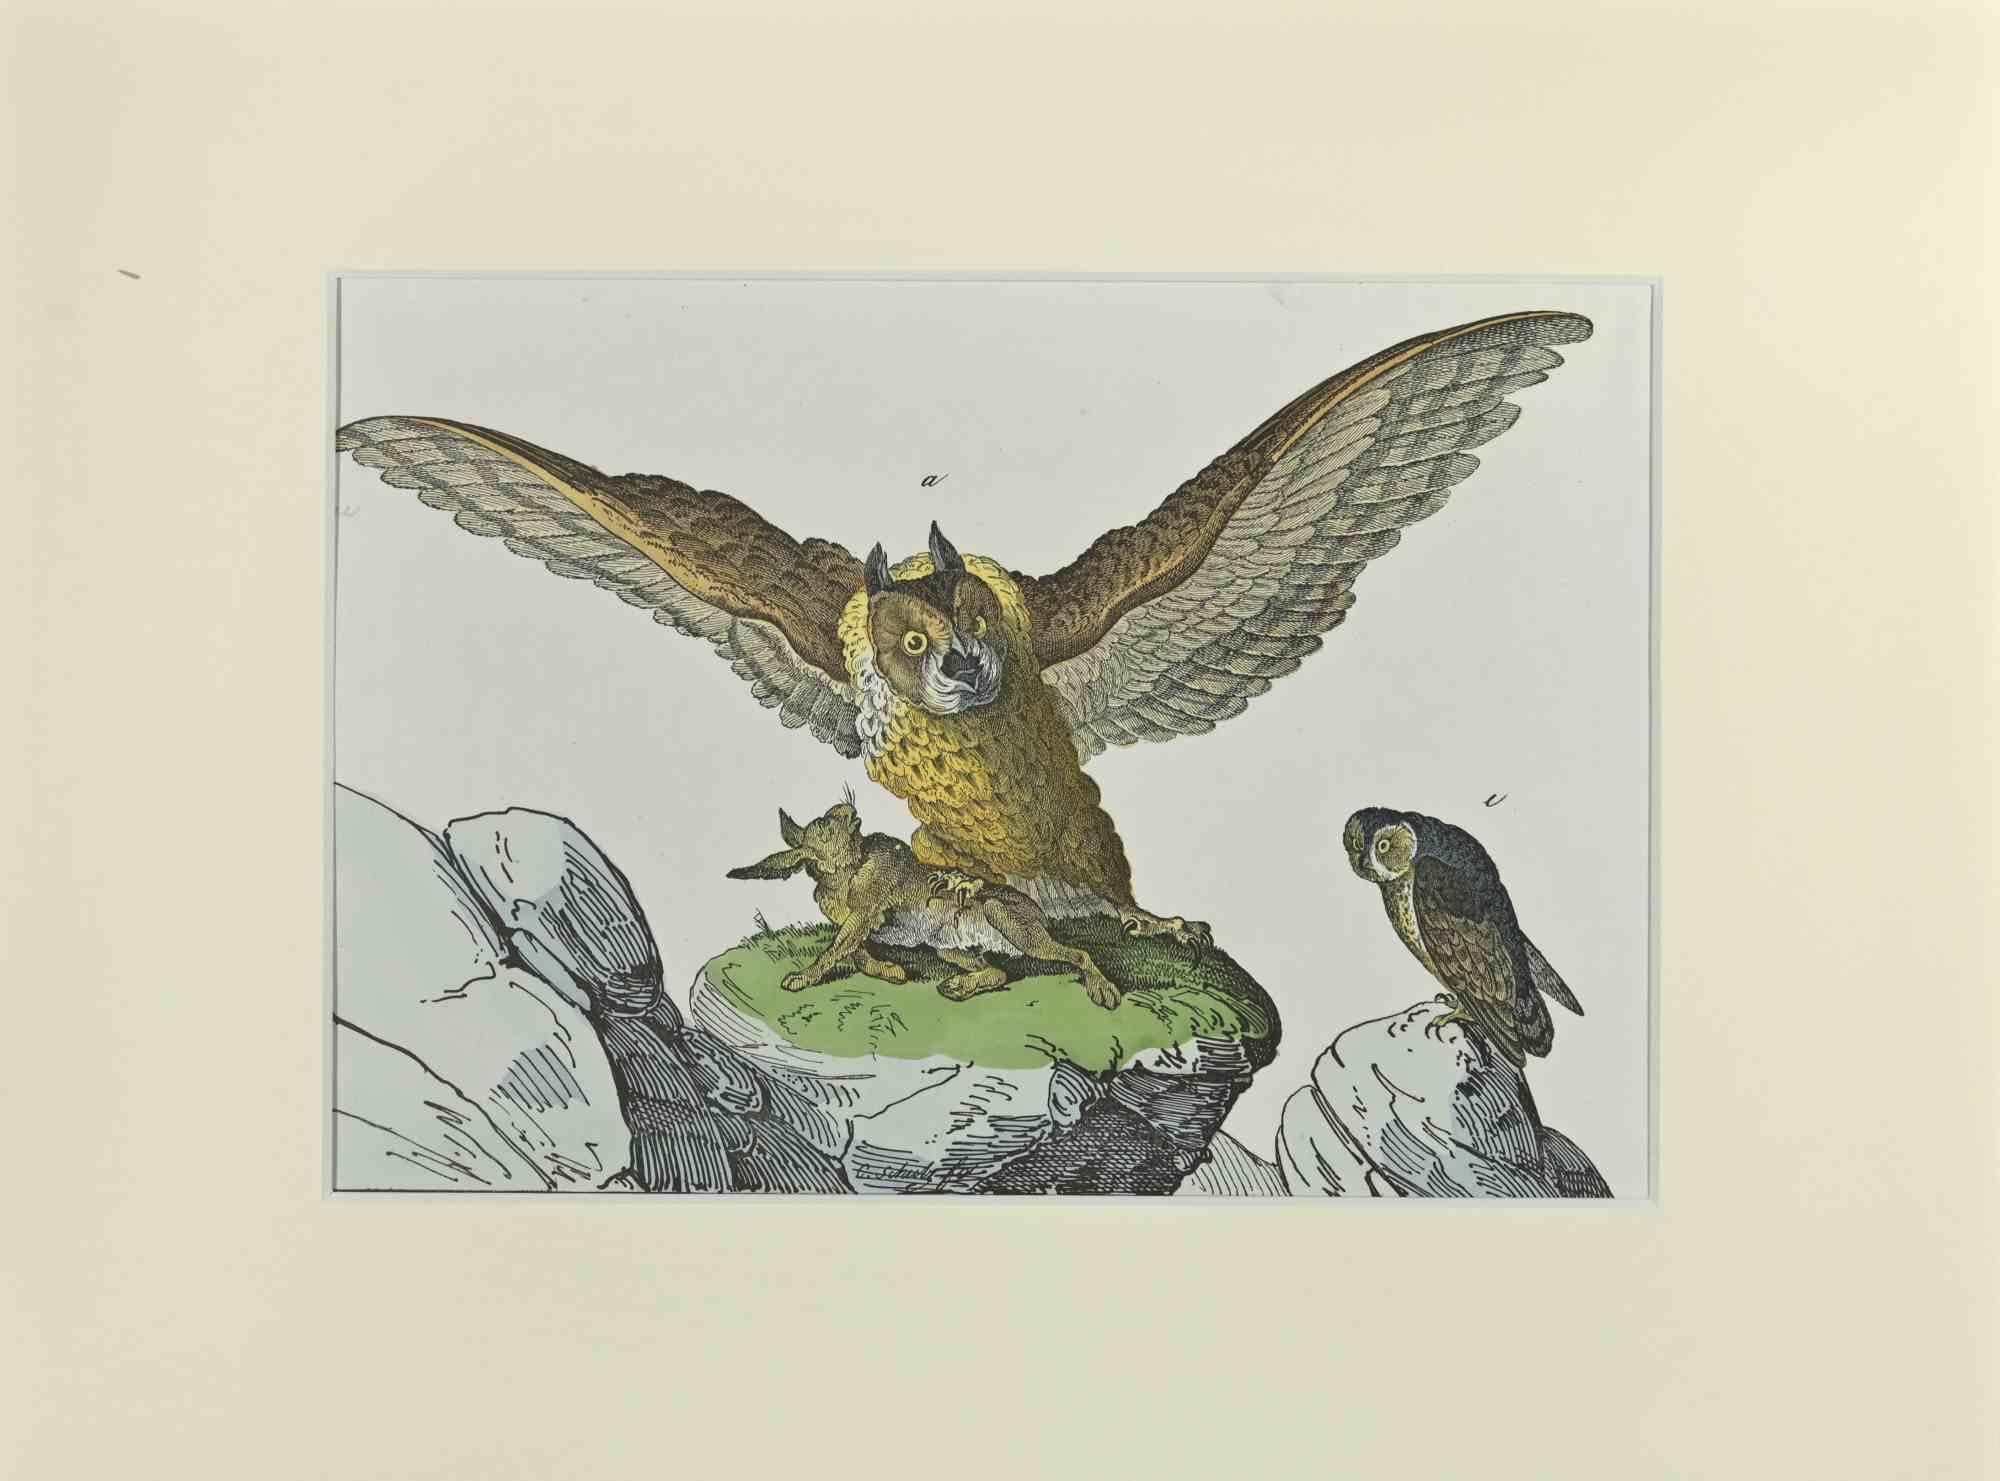 Great Owl is an Etching hand colored realized by Gotthilf Heinrich von Schubert - Johann Friedrich Naumann, Illustration from Natural history of birds in pictures, published by Stuttgart and Esslingen, Schreiber and Schill 1840 ca. 

Illustration